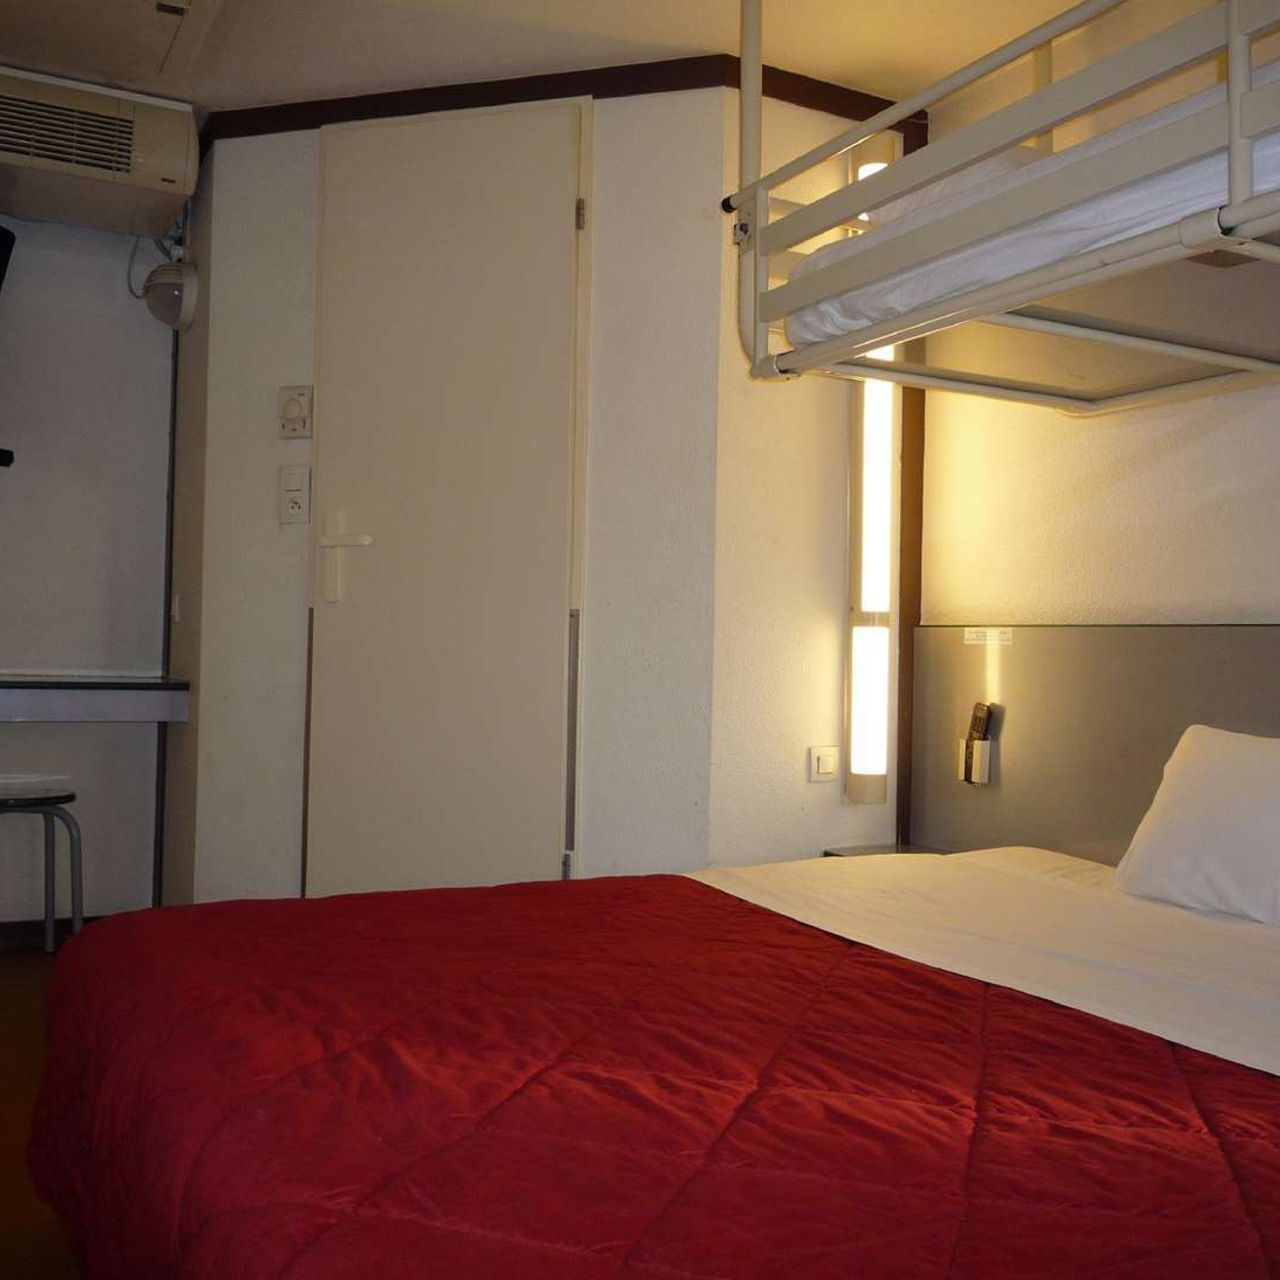 Hotel Première Classe VALENCE SUD - Valence - Great prices at HOTEL INFO